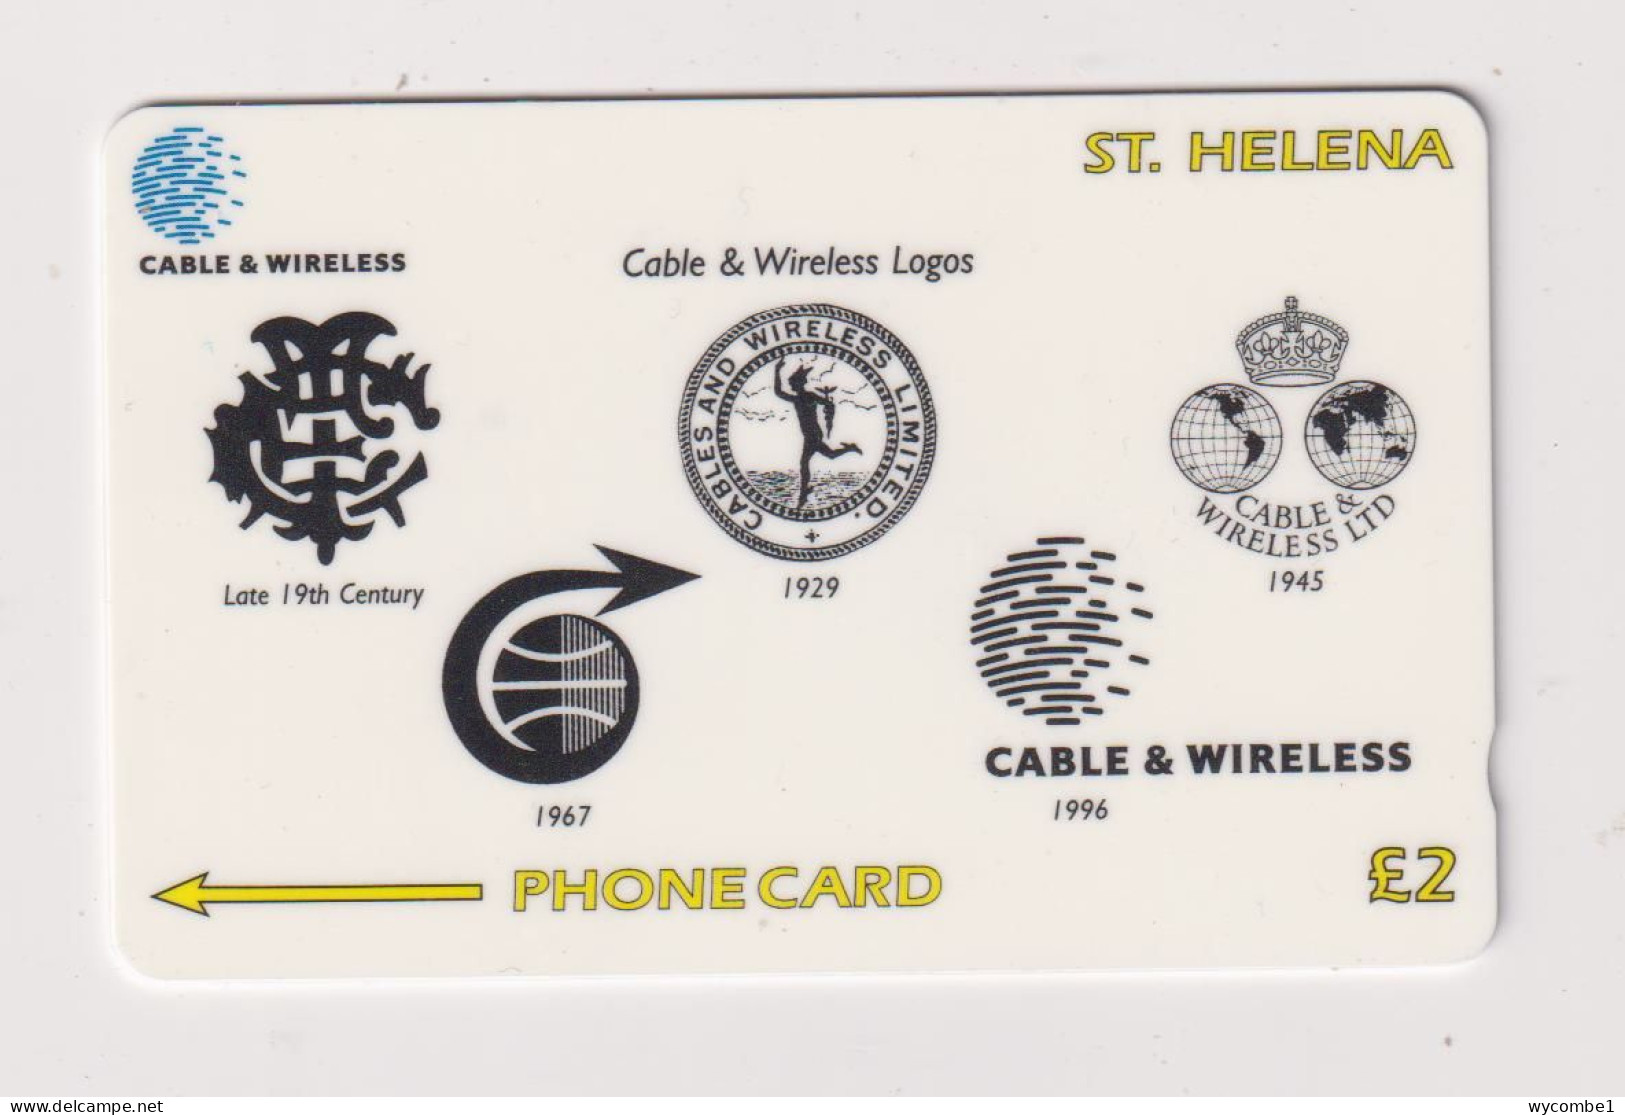 ST HELENA - Cable And Wireless Logos GPT Magnetic  Phonecard - St. Helena Island